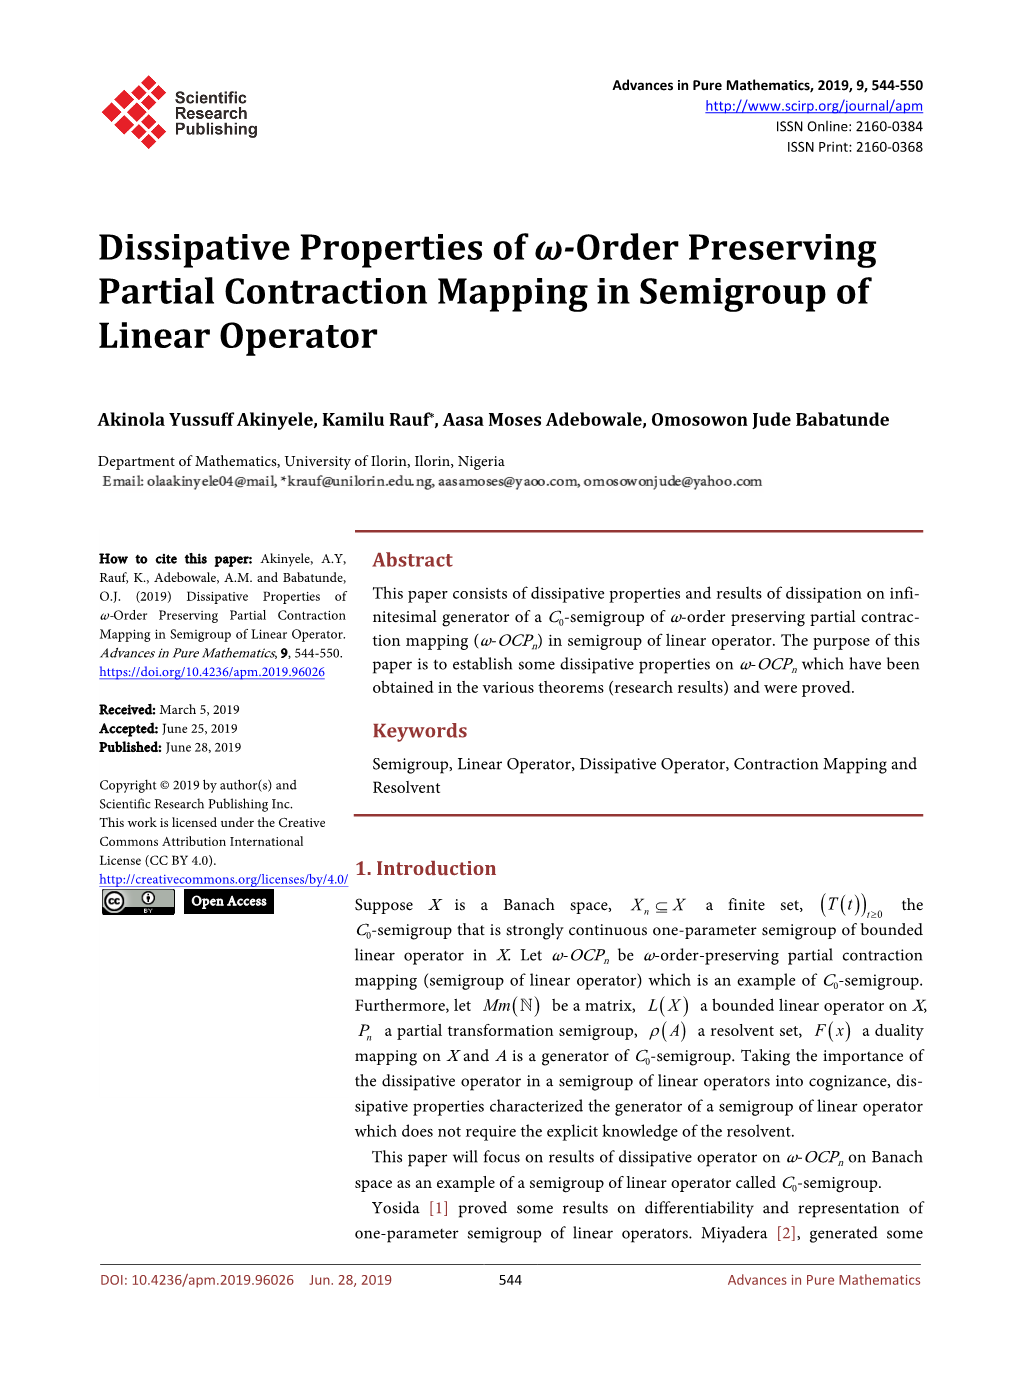 Dissipative Properties of Ω-Order Preserving Partial Contraction Mapping in Semigroup of Linear Operator